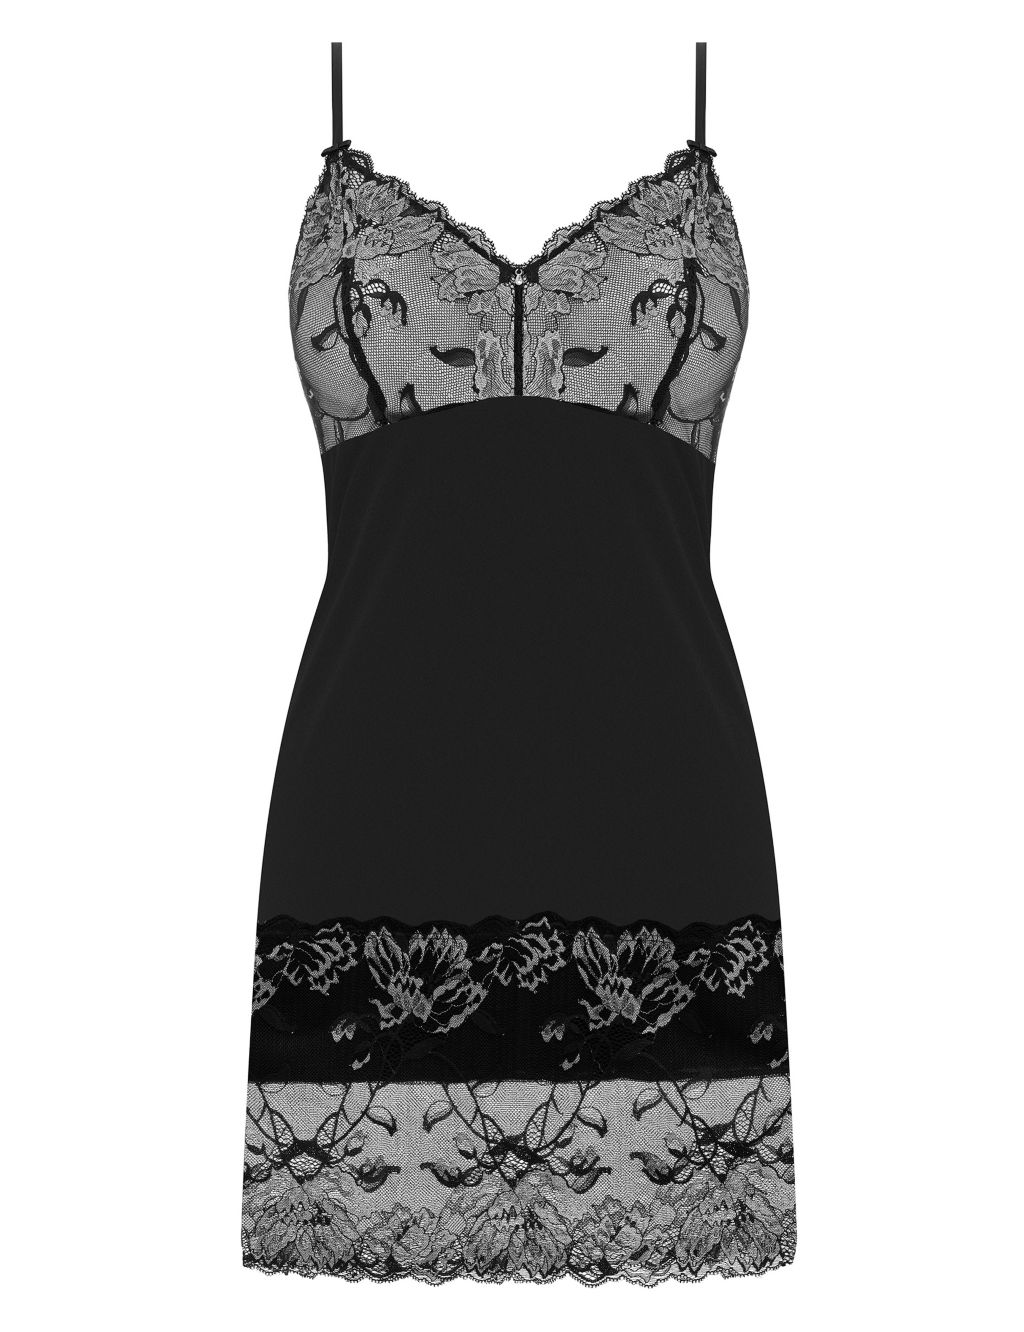 Aubree Strappy Lace Chemise image 2